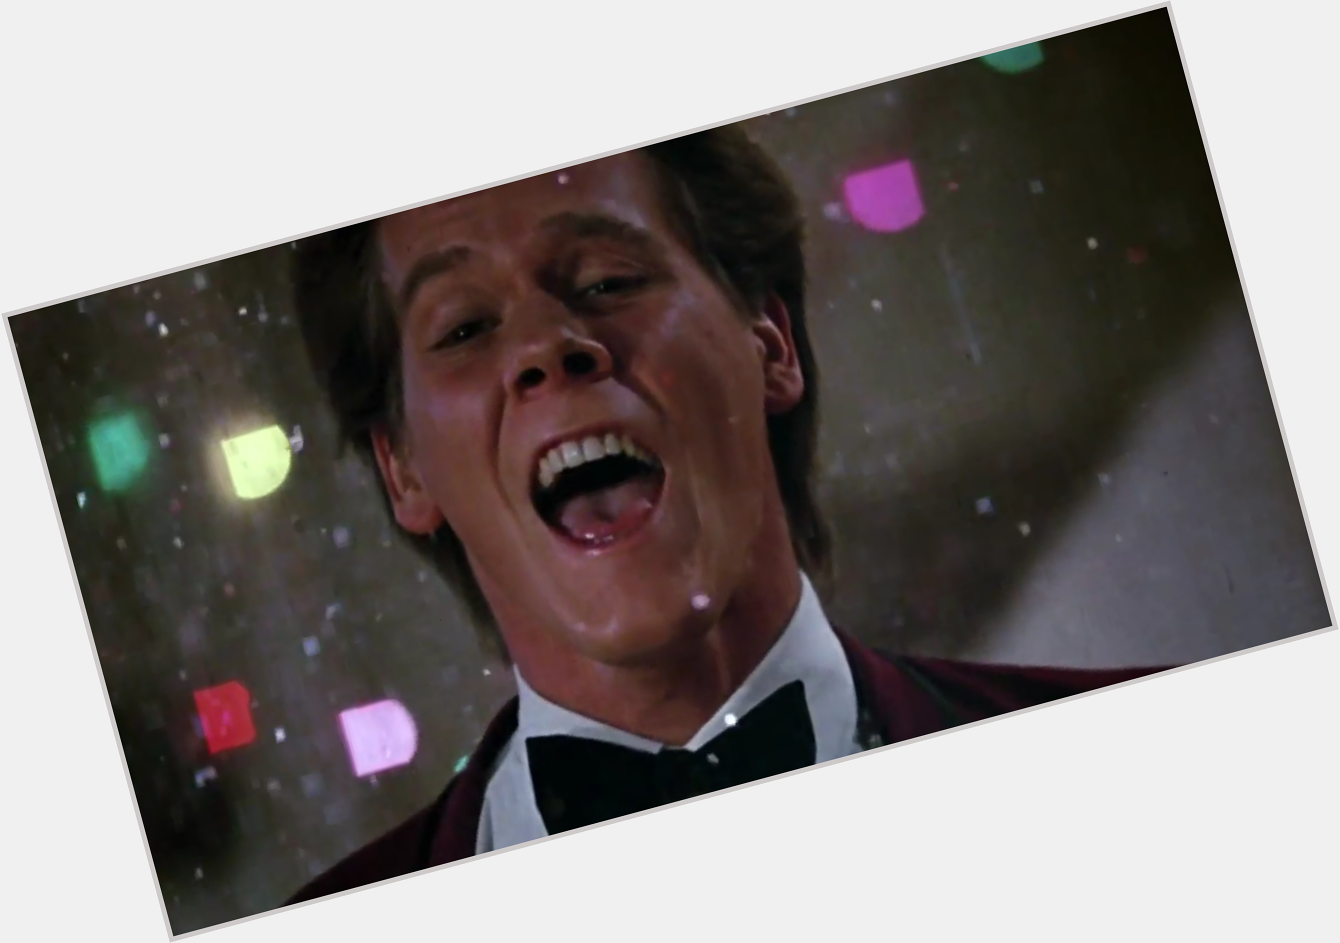 Happy Birthday Kevin Bacon! Check him out in his breakout role, the original FOOTLOOSE:  